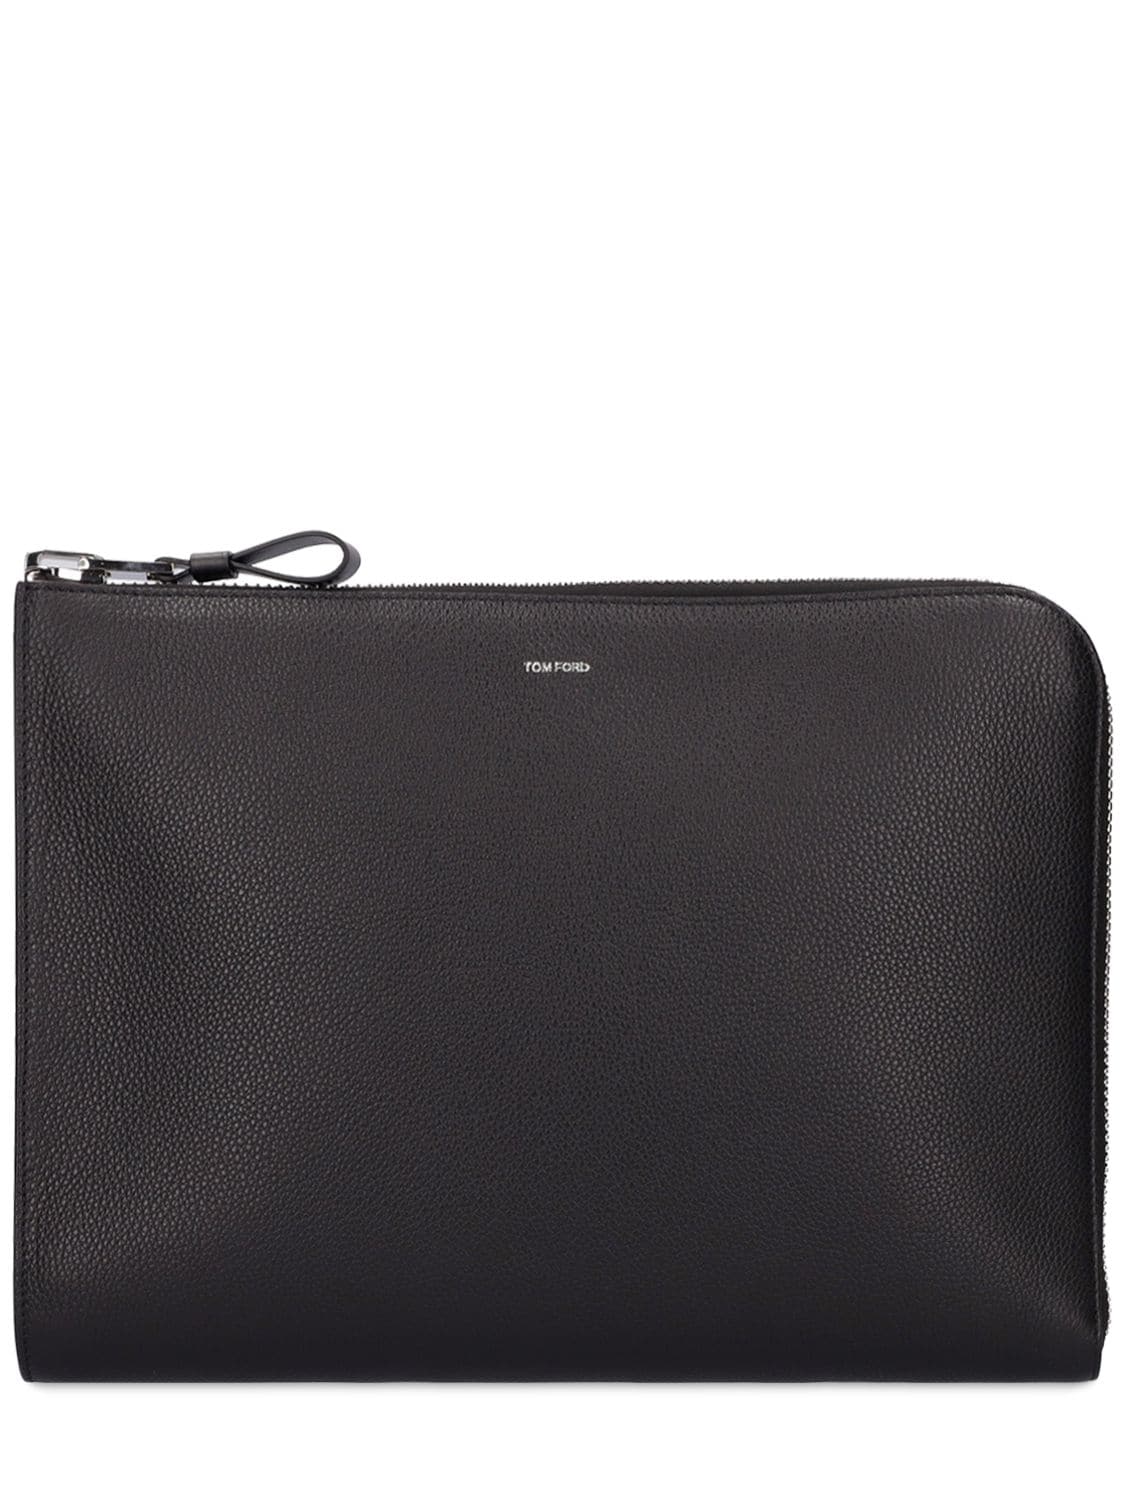 Tom Ford Soft Grain Leather Zip Pouch In Black | ModeSens